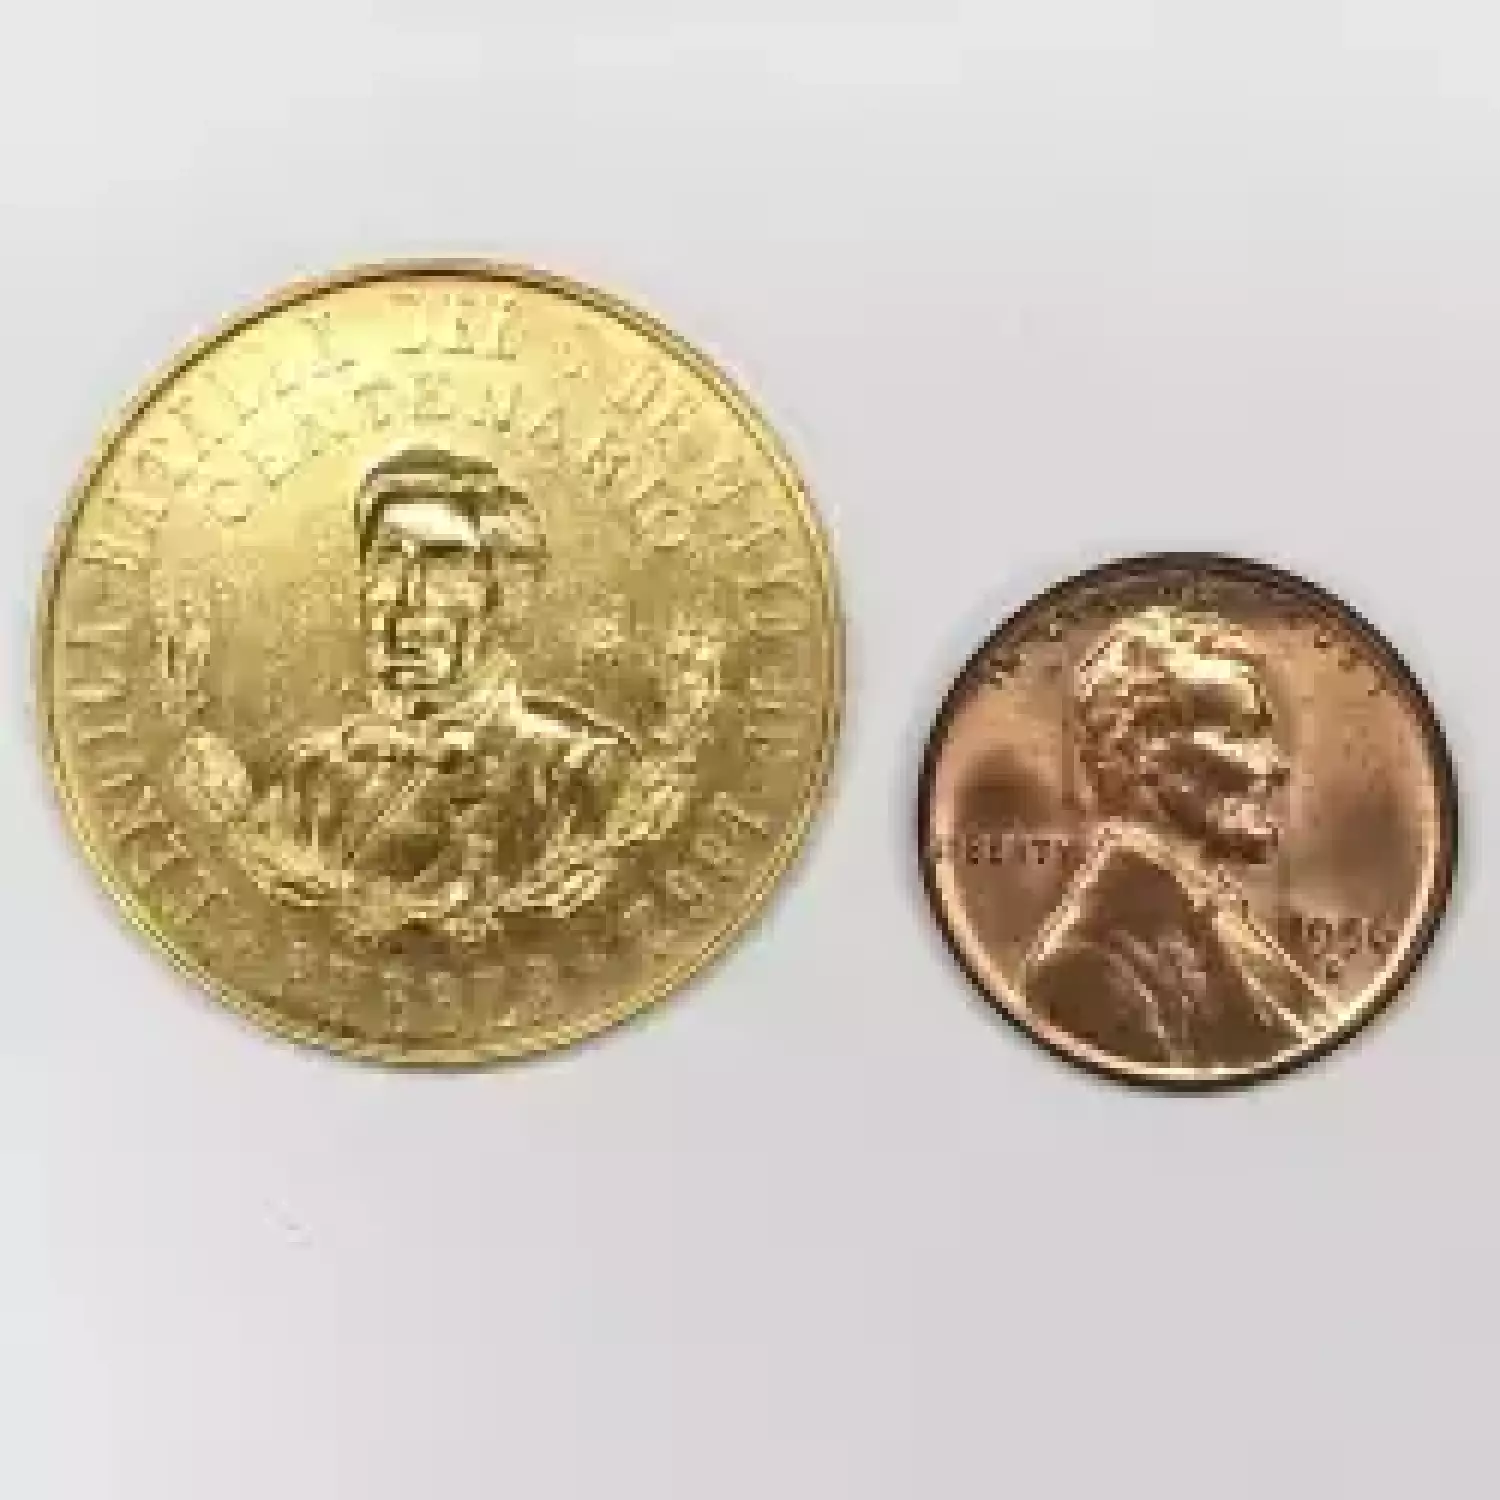 Mexico Official Mint Medal